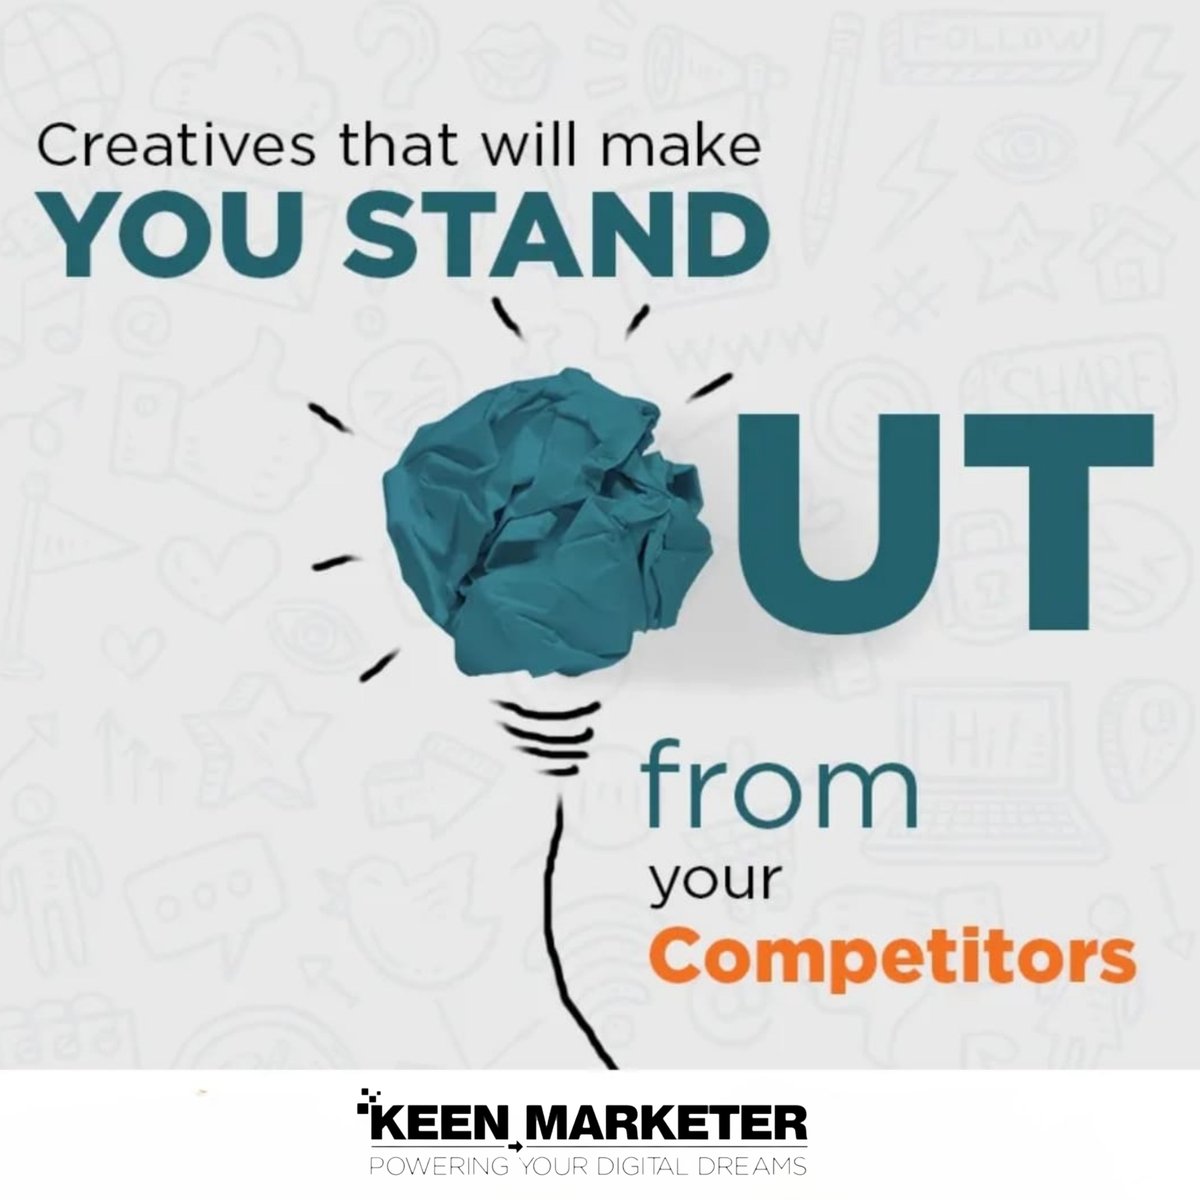 Stand out from the crowd with our creative solutions that set you apart from competitors! 𝗖𝗼𝗻𝘁𝗮𝗰𝘁 𝘂𝘀 𝗳𝗼𝗿 𝘆𝗼𝘂𝗿 𝗽𝗿𝗼𝗷𝗲𝗰𝘁 𝗾𝘂𝗲𝗿𝘆. 📷Visit Our Website: keenmarketer.in 📷 Call Now: +91-931-934-7701 #keenmarketer #DigitalMarketing